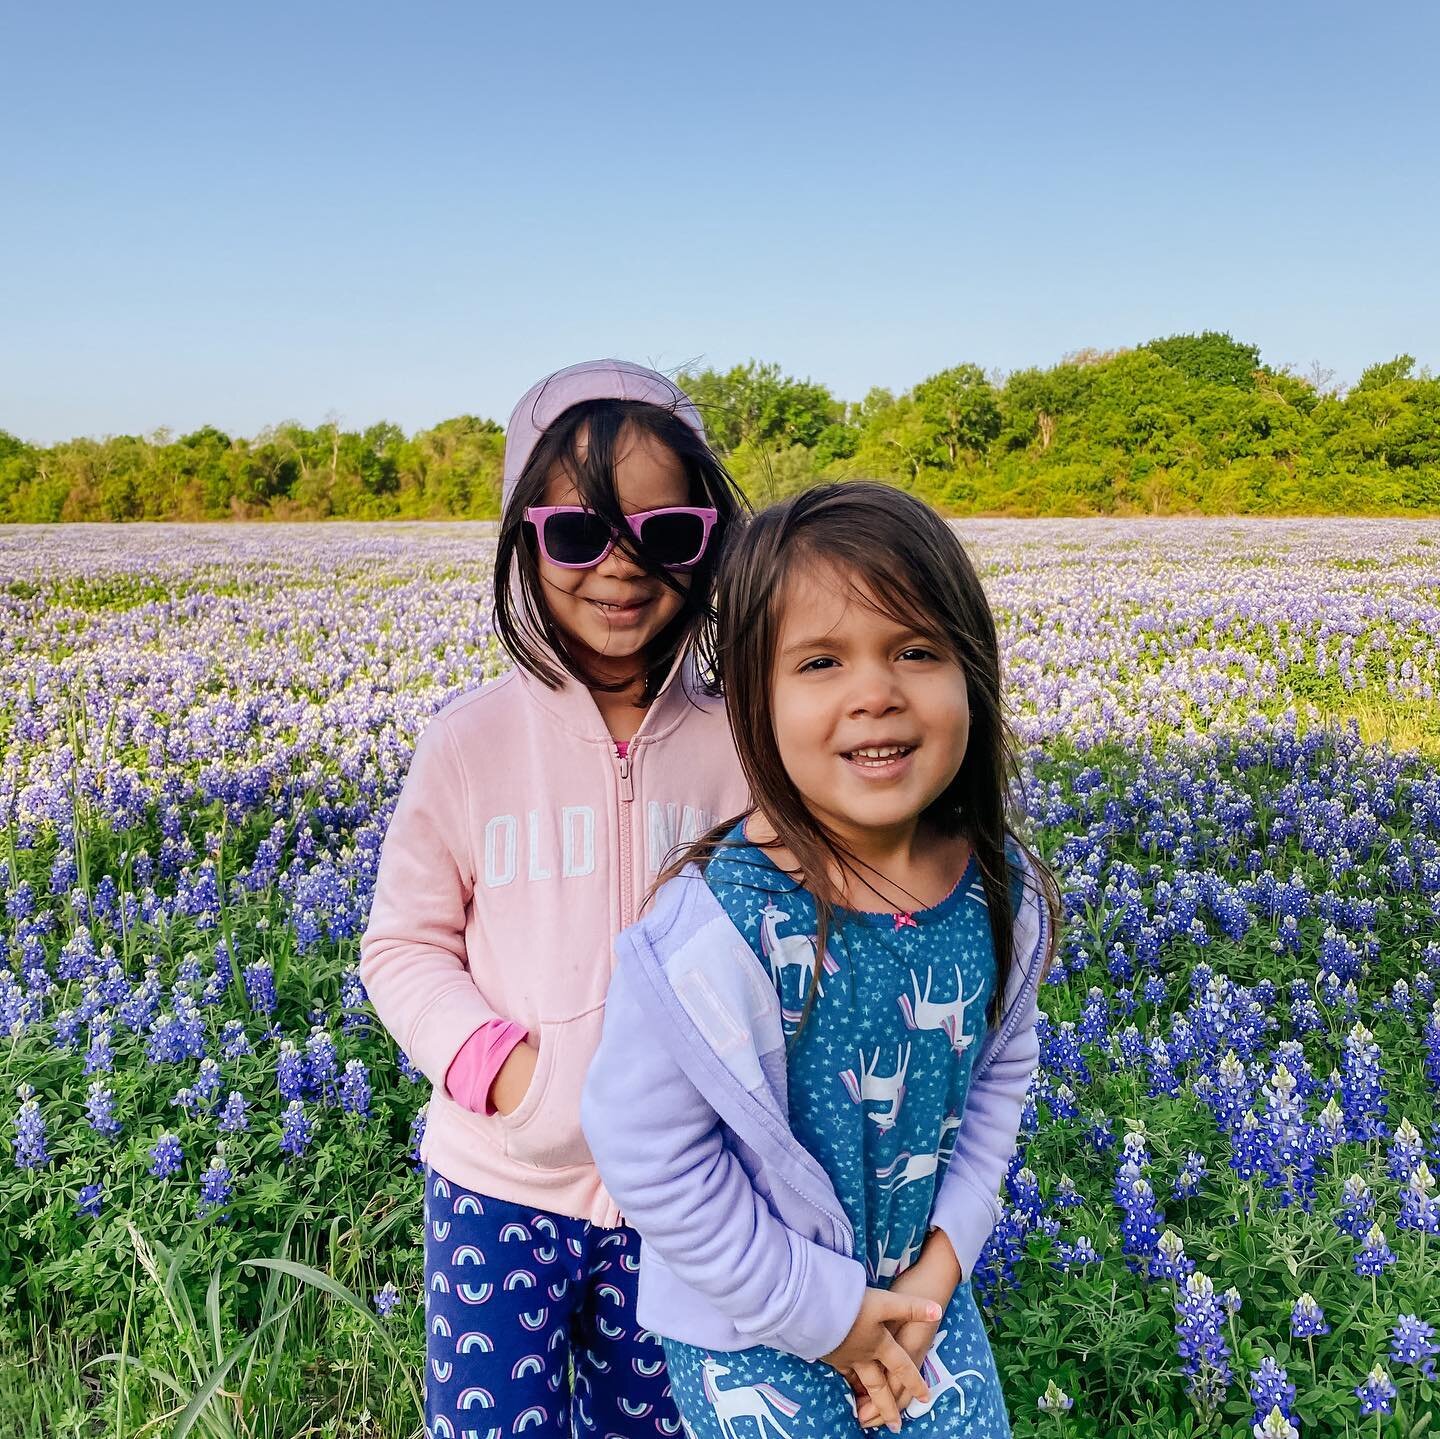 When your mom drags you out early to look for bluebonnets and then asks you to model to test the light 😅 Paid them with Starbucks. &ldquo;We should come back with our nice clothes on.&rdquo;